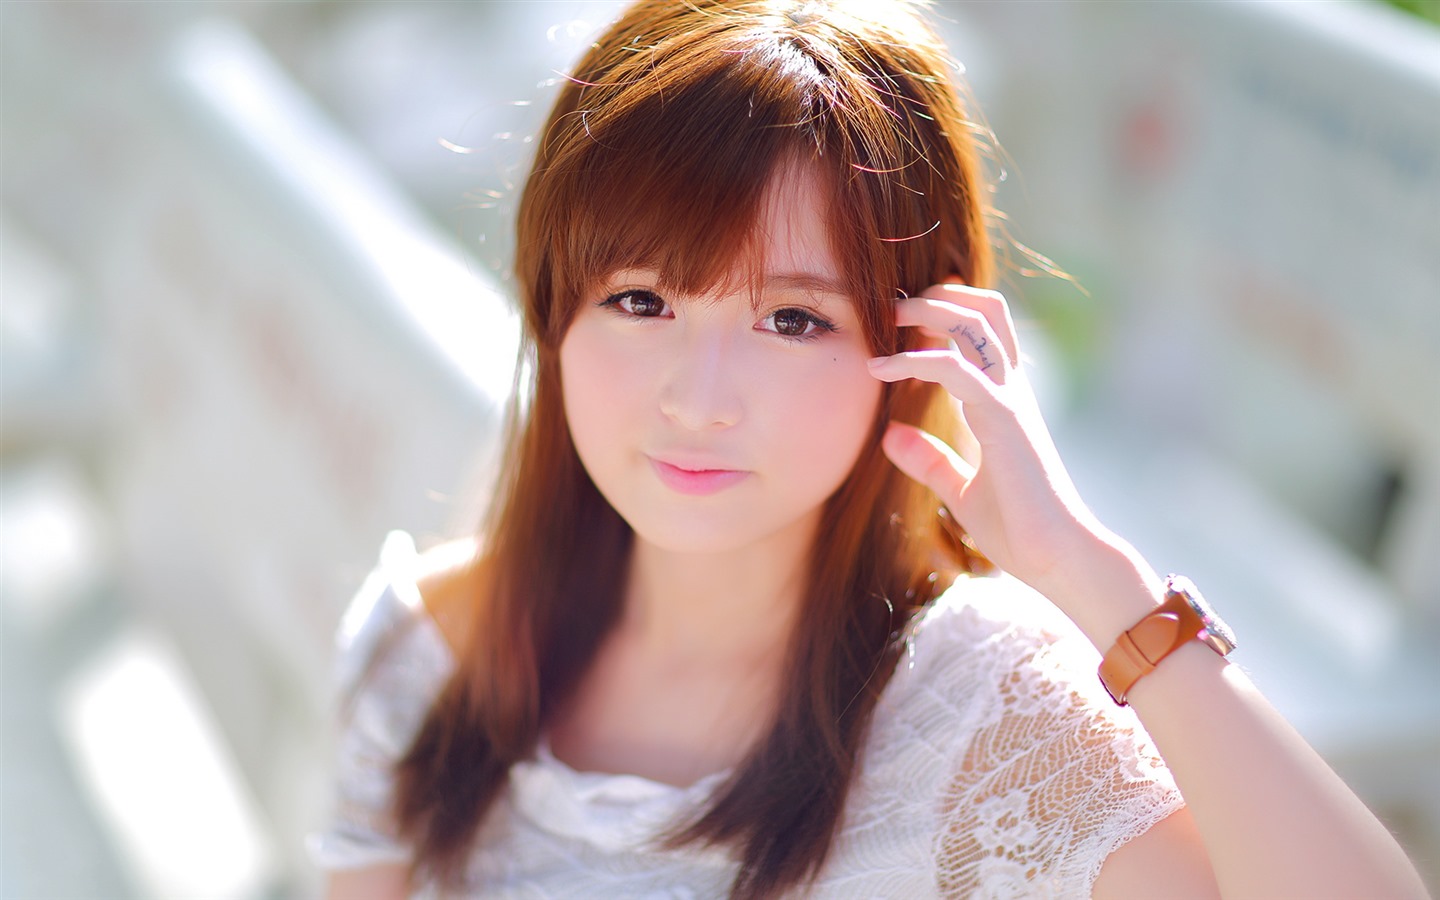 Pure and lovely young Asian girl HD wallpapers collection (2) #36 - 1440x900